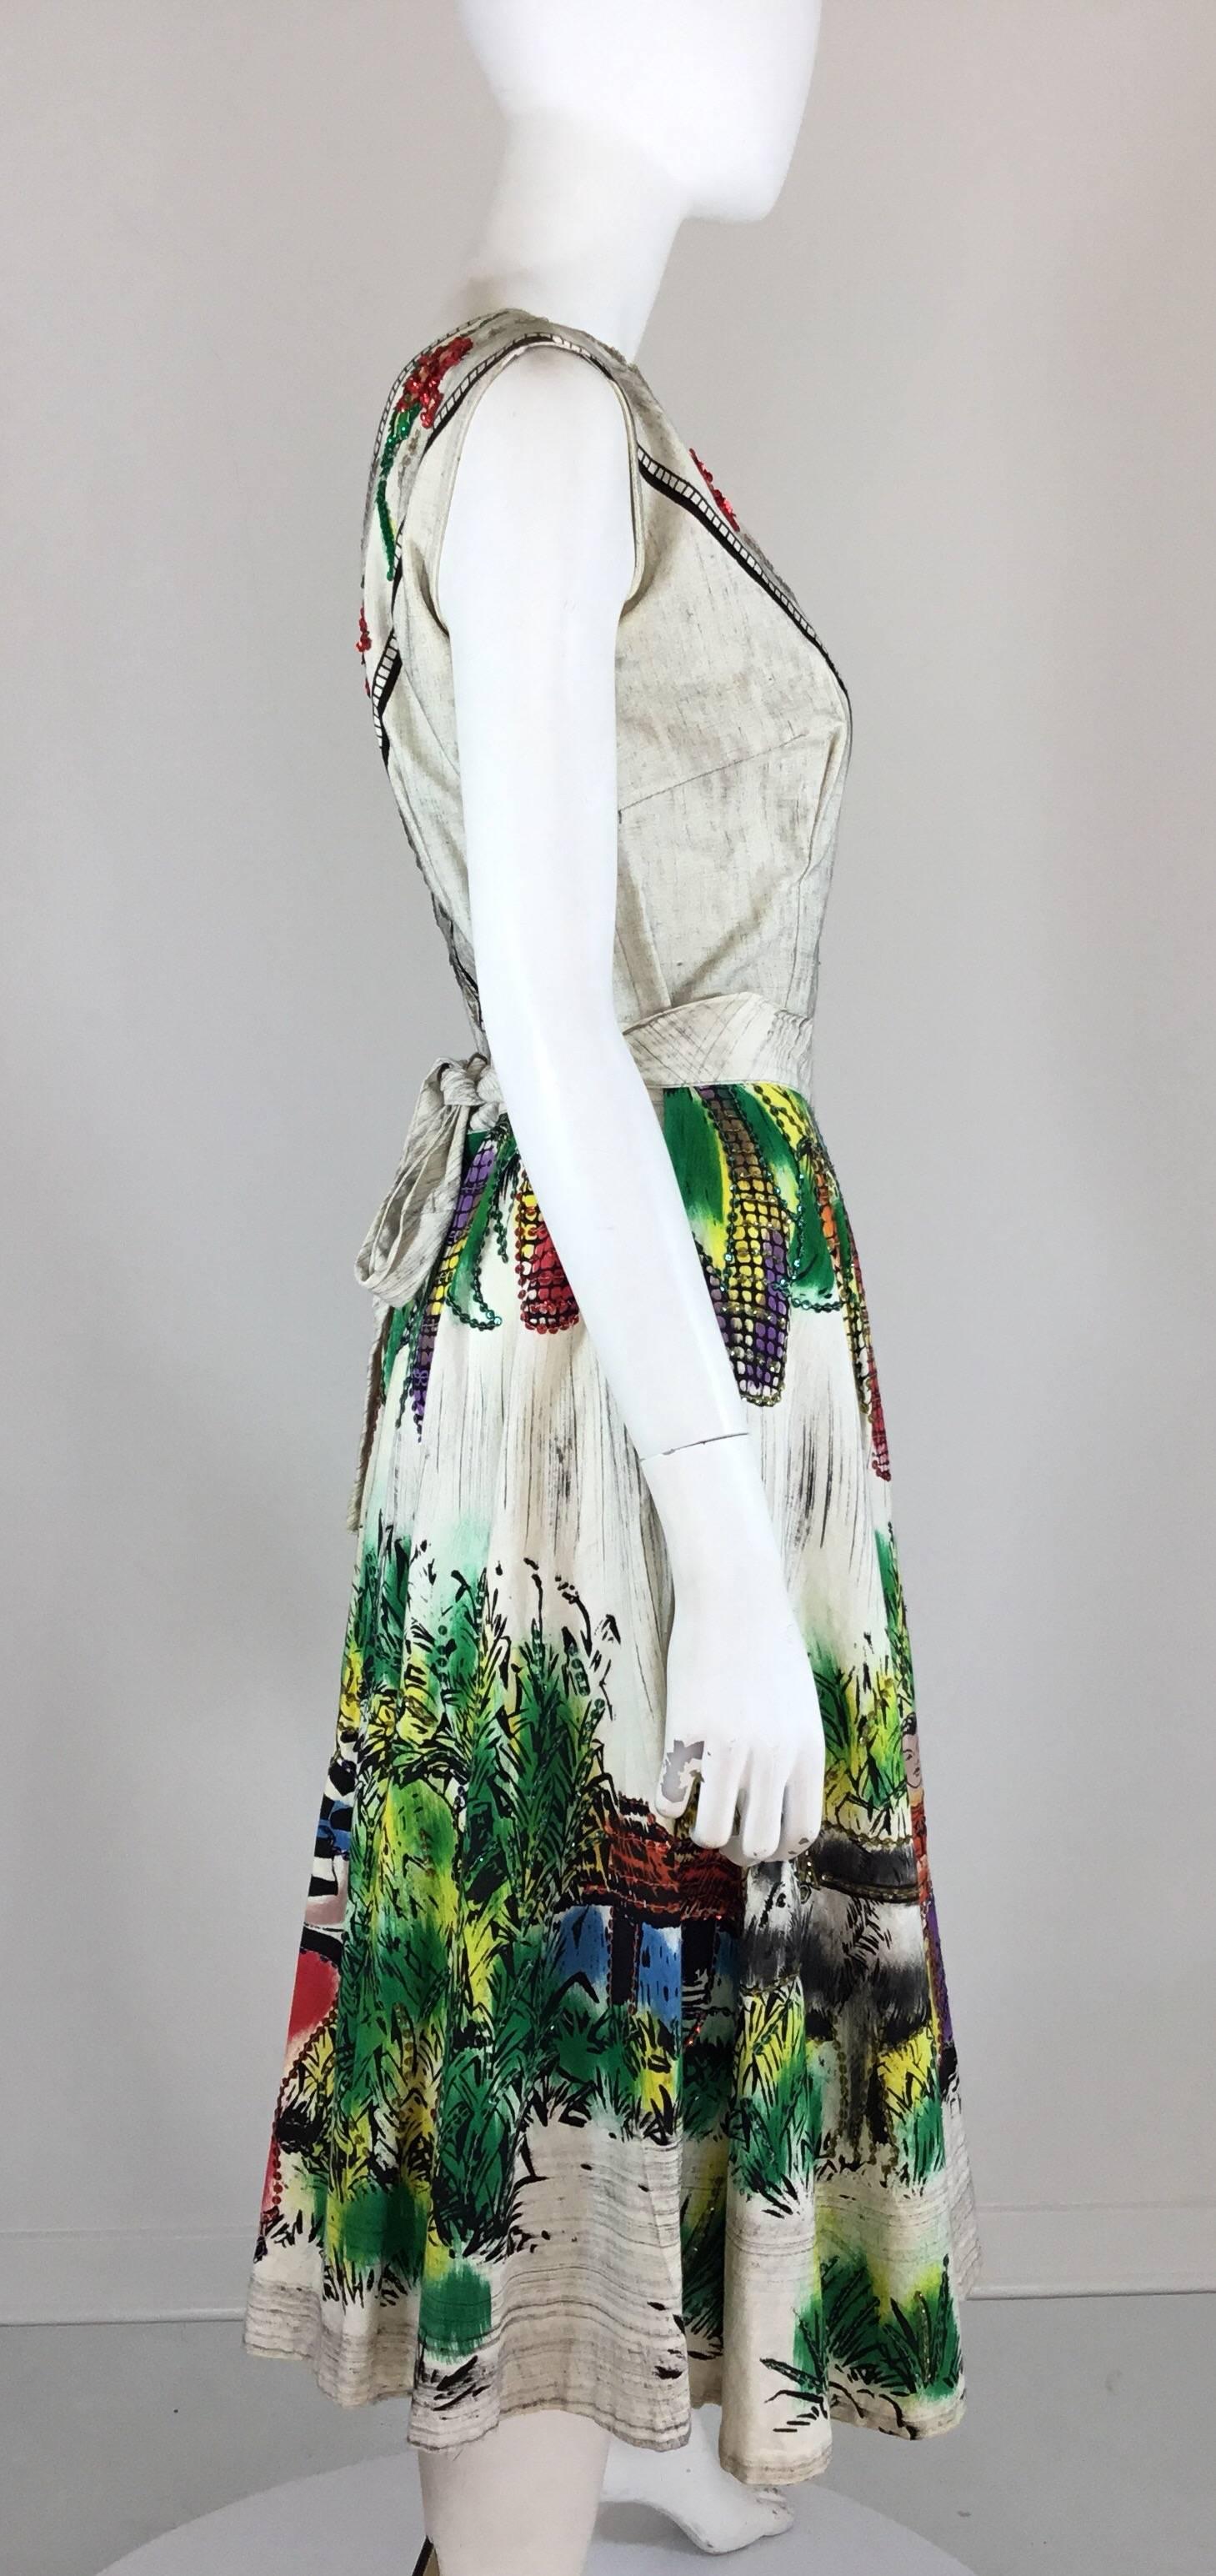 Gray Londy of Mexico 1950s Vintage Hand-Painted Skirt Top Ensemble